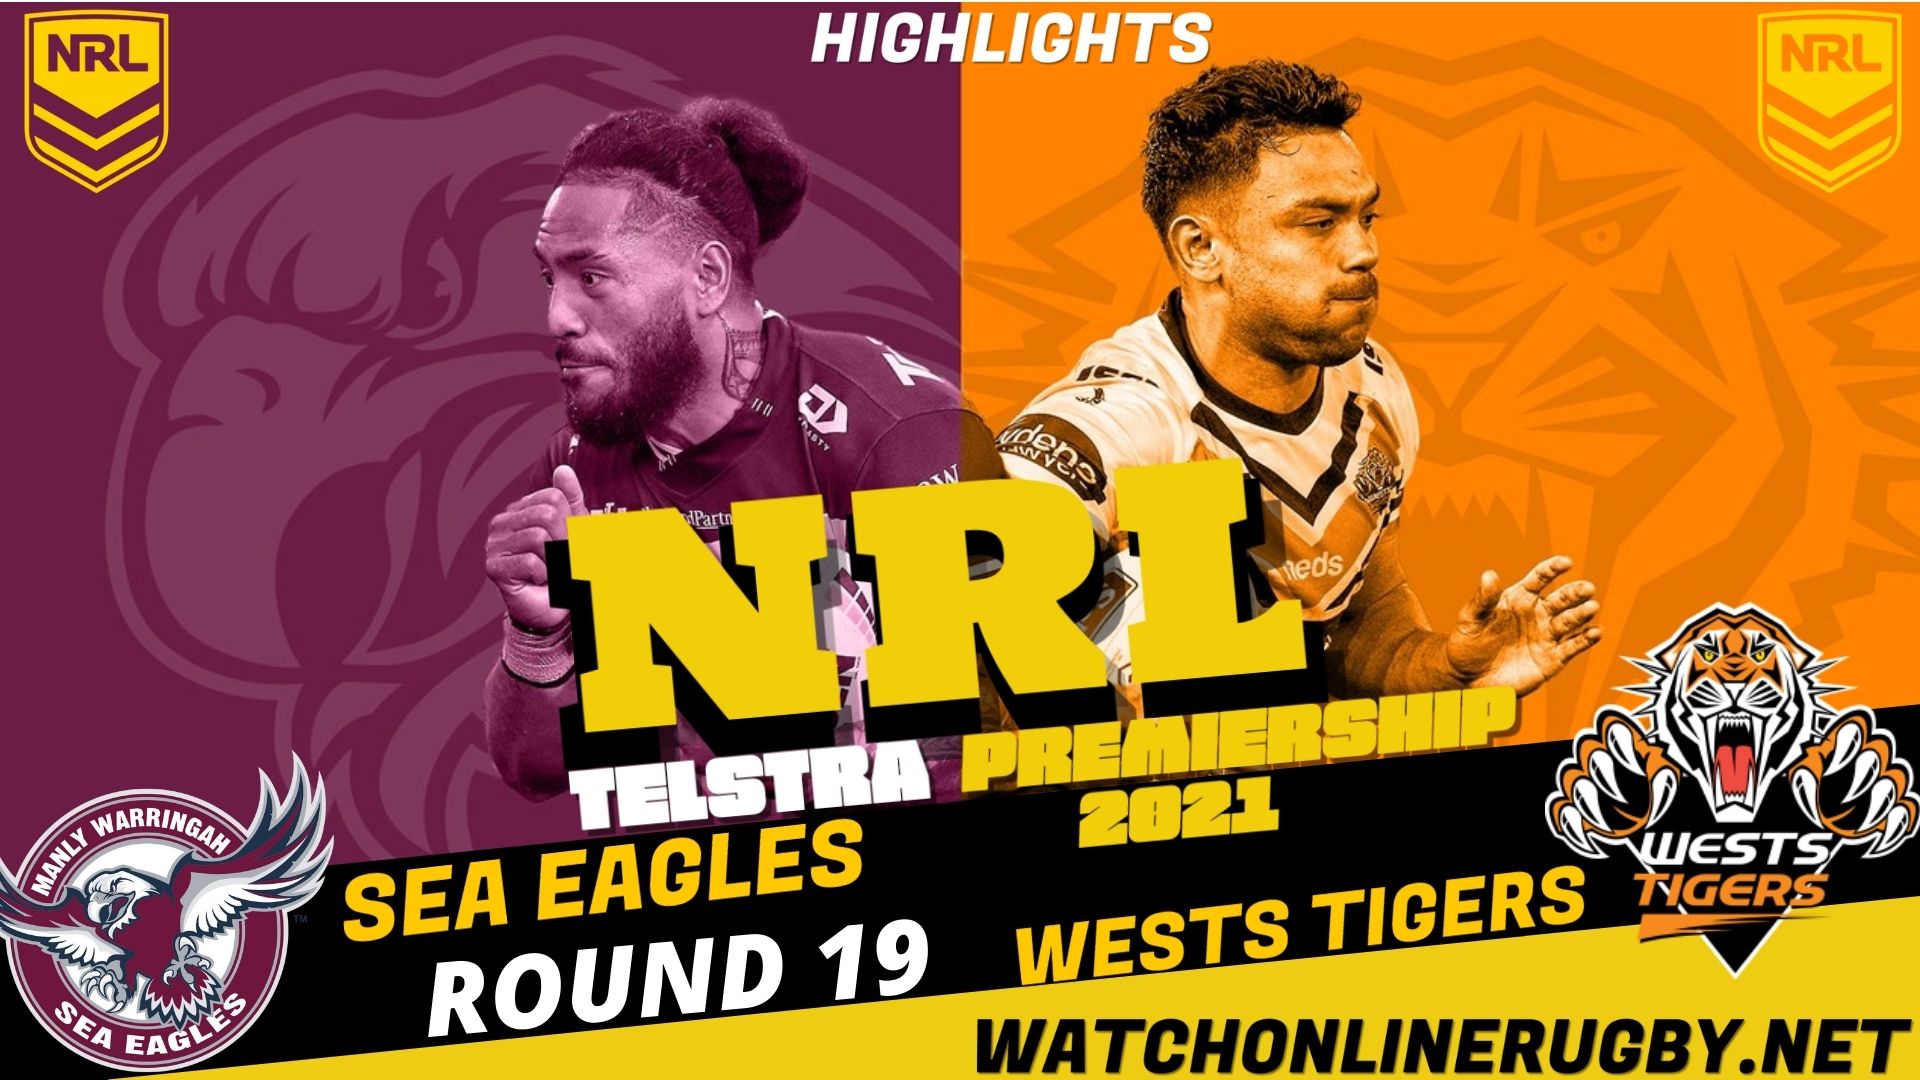 Sea Eagles Vs Wests Tigers Highlights RD 19 NRL Rugby